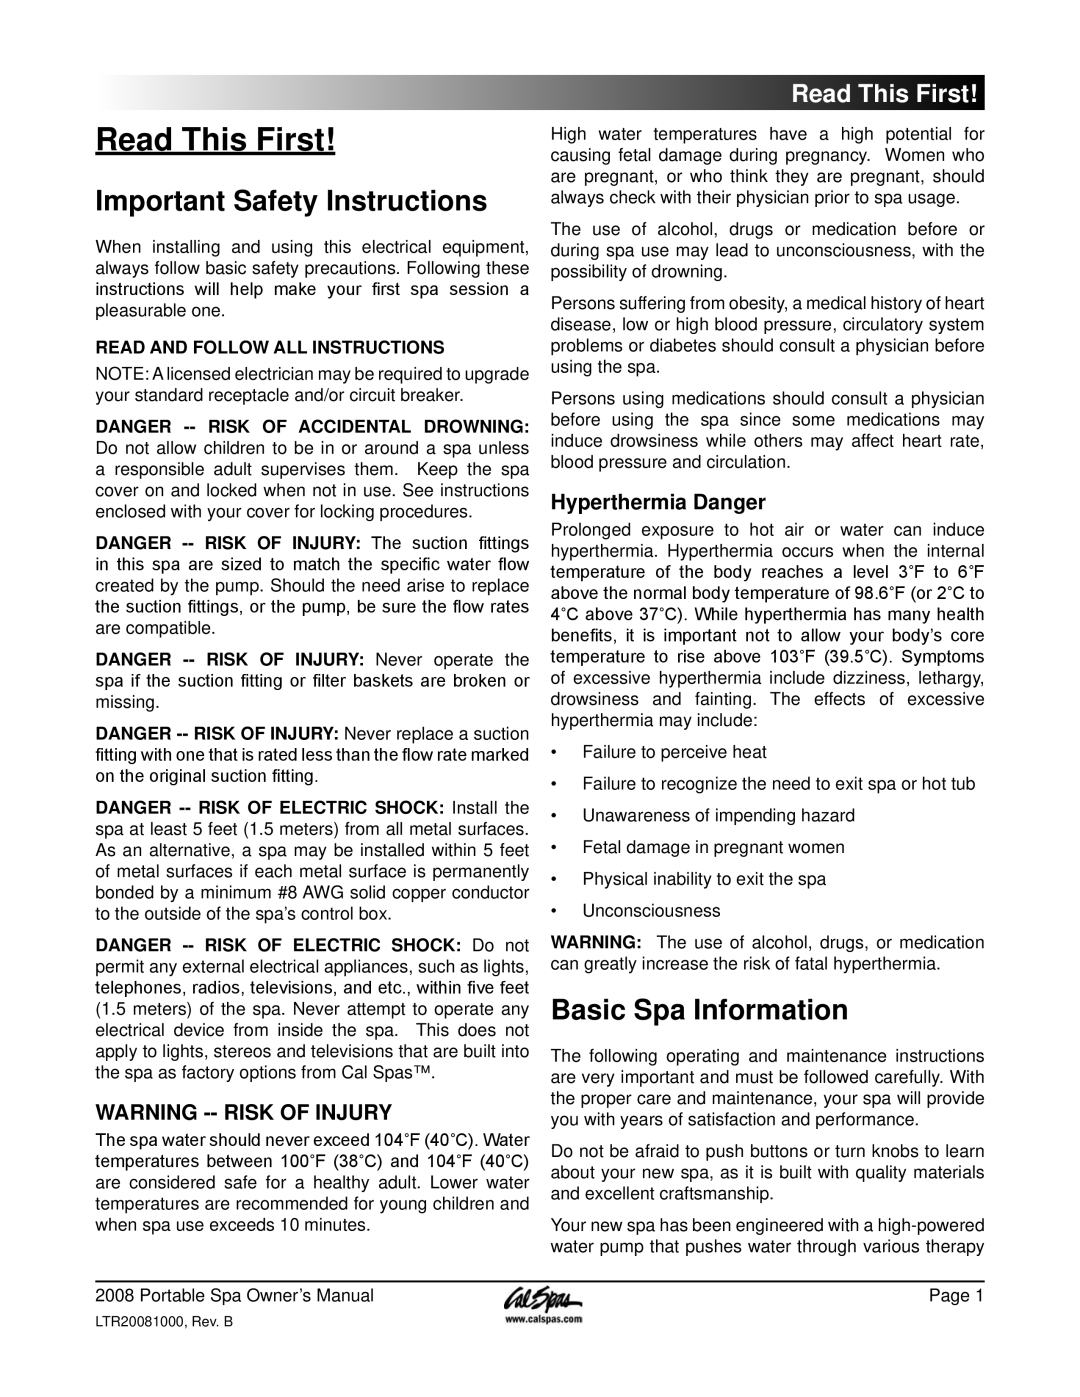 Cal Spas 6300, 5100, 6200 Read This First, Important Safety Instructions, Basic Spa Information, Warning --Risk Of Injury 